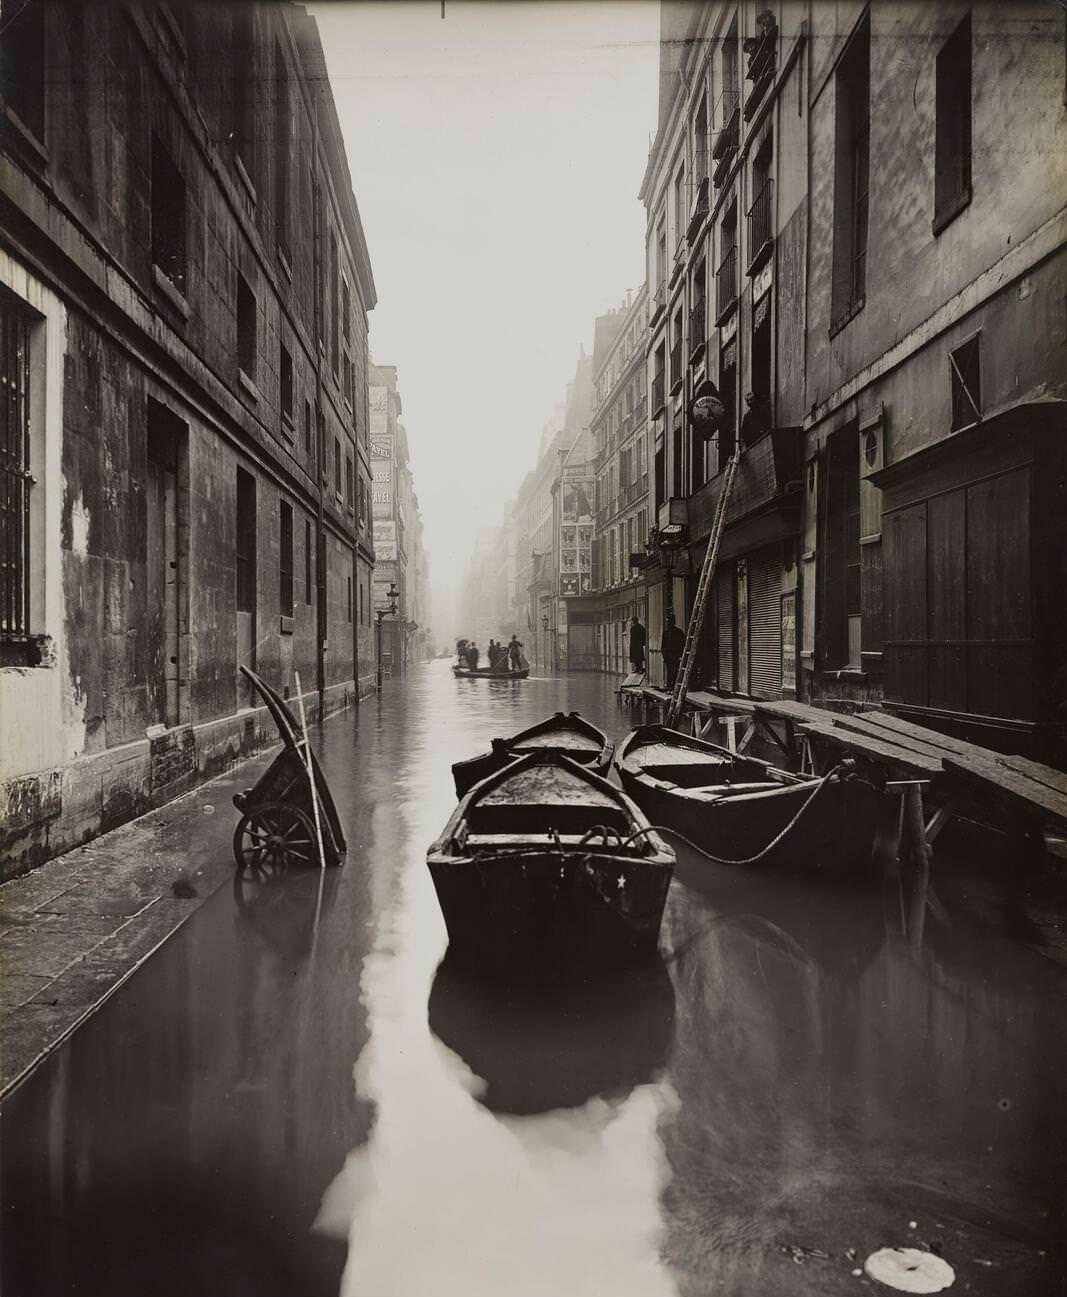 Unknown French, Paris Flood, Street with Boats and Cart, January 27-31, 1910.